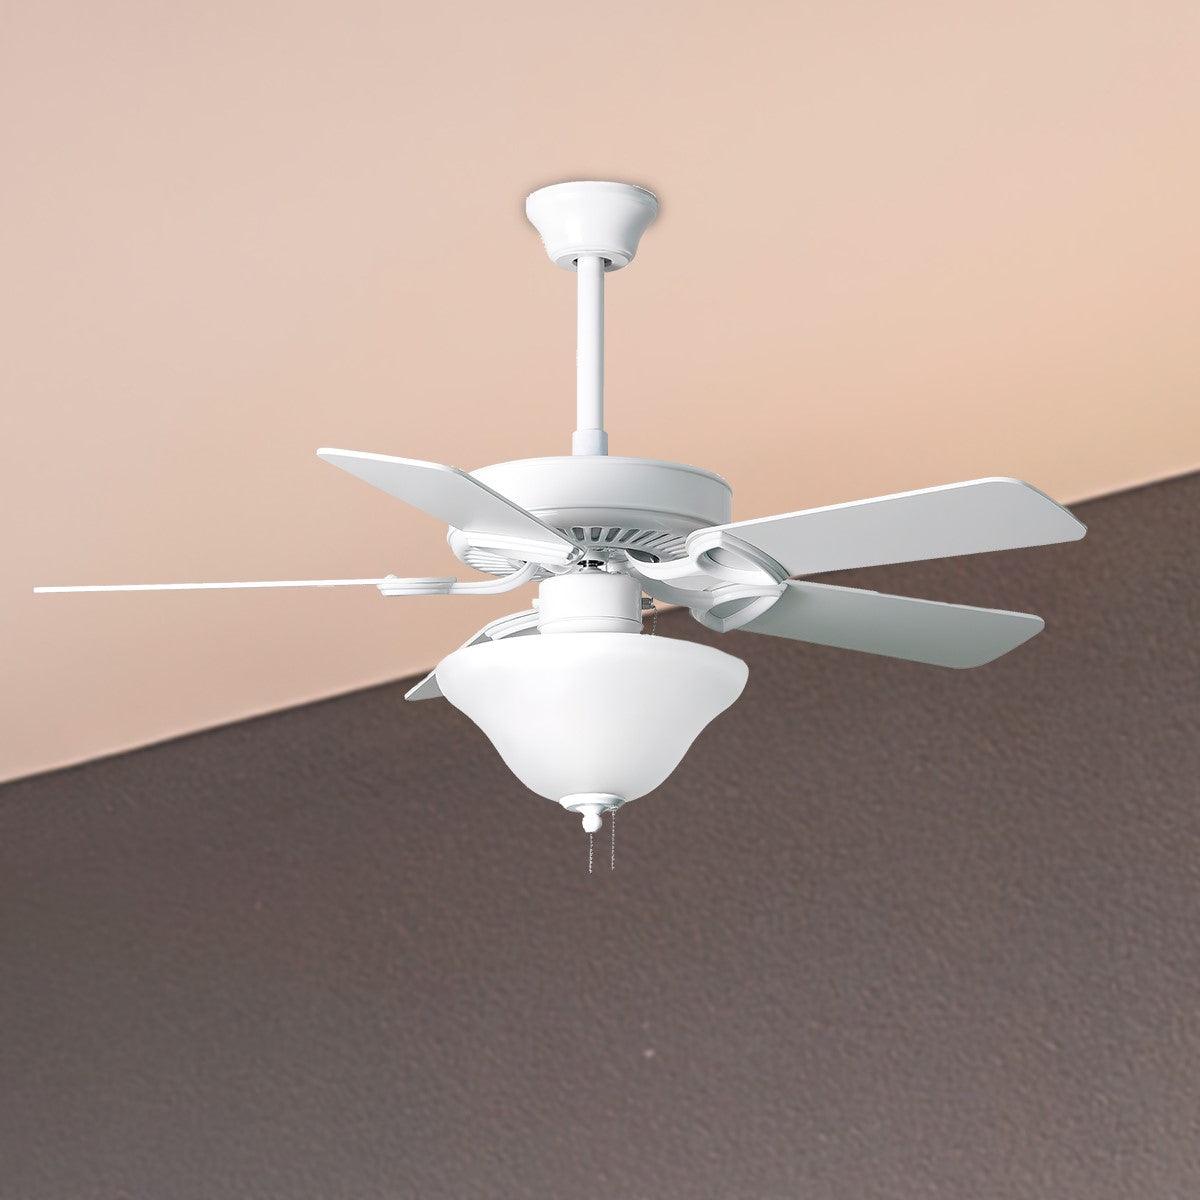 America USA 42 Inch 5 Blades Ceiling Fan With Light And Pull Chain, Gloss White Finish